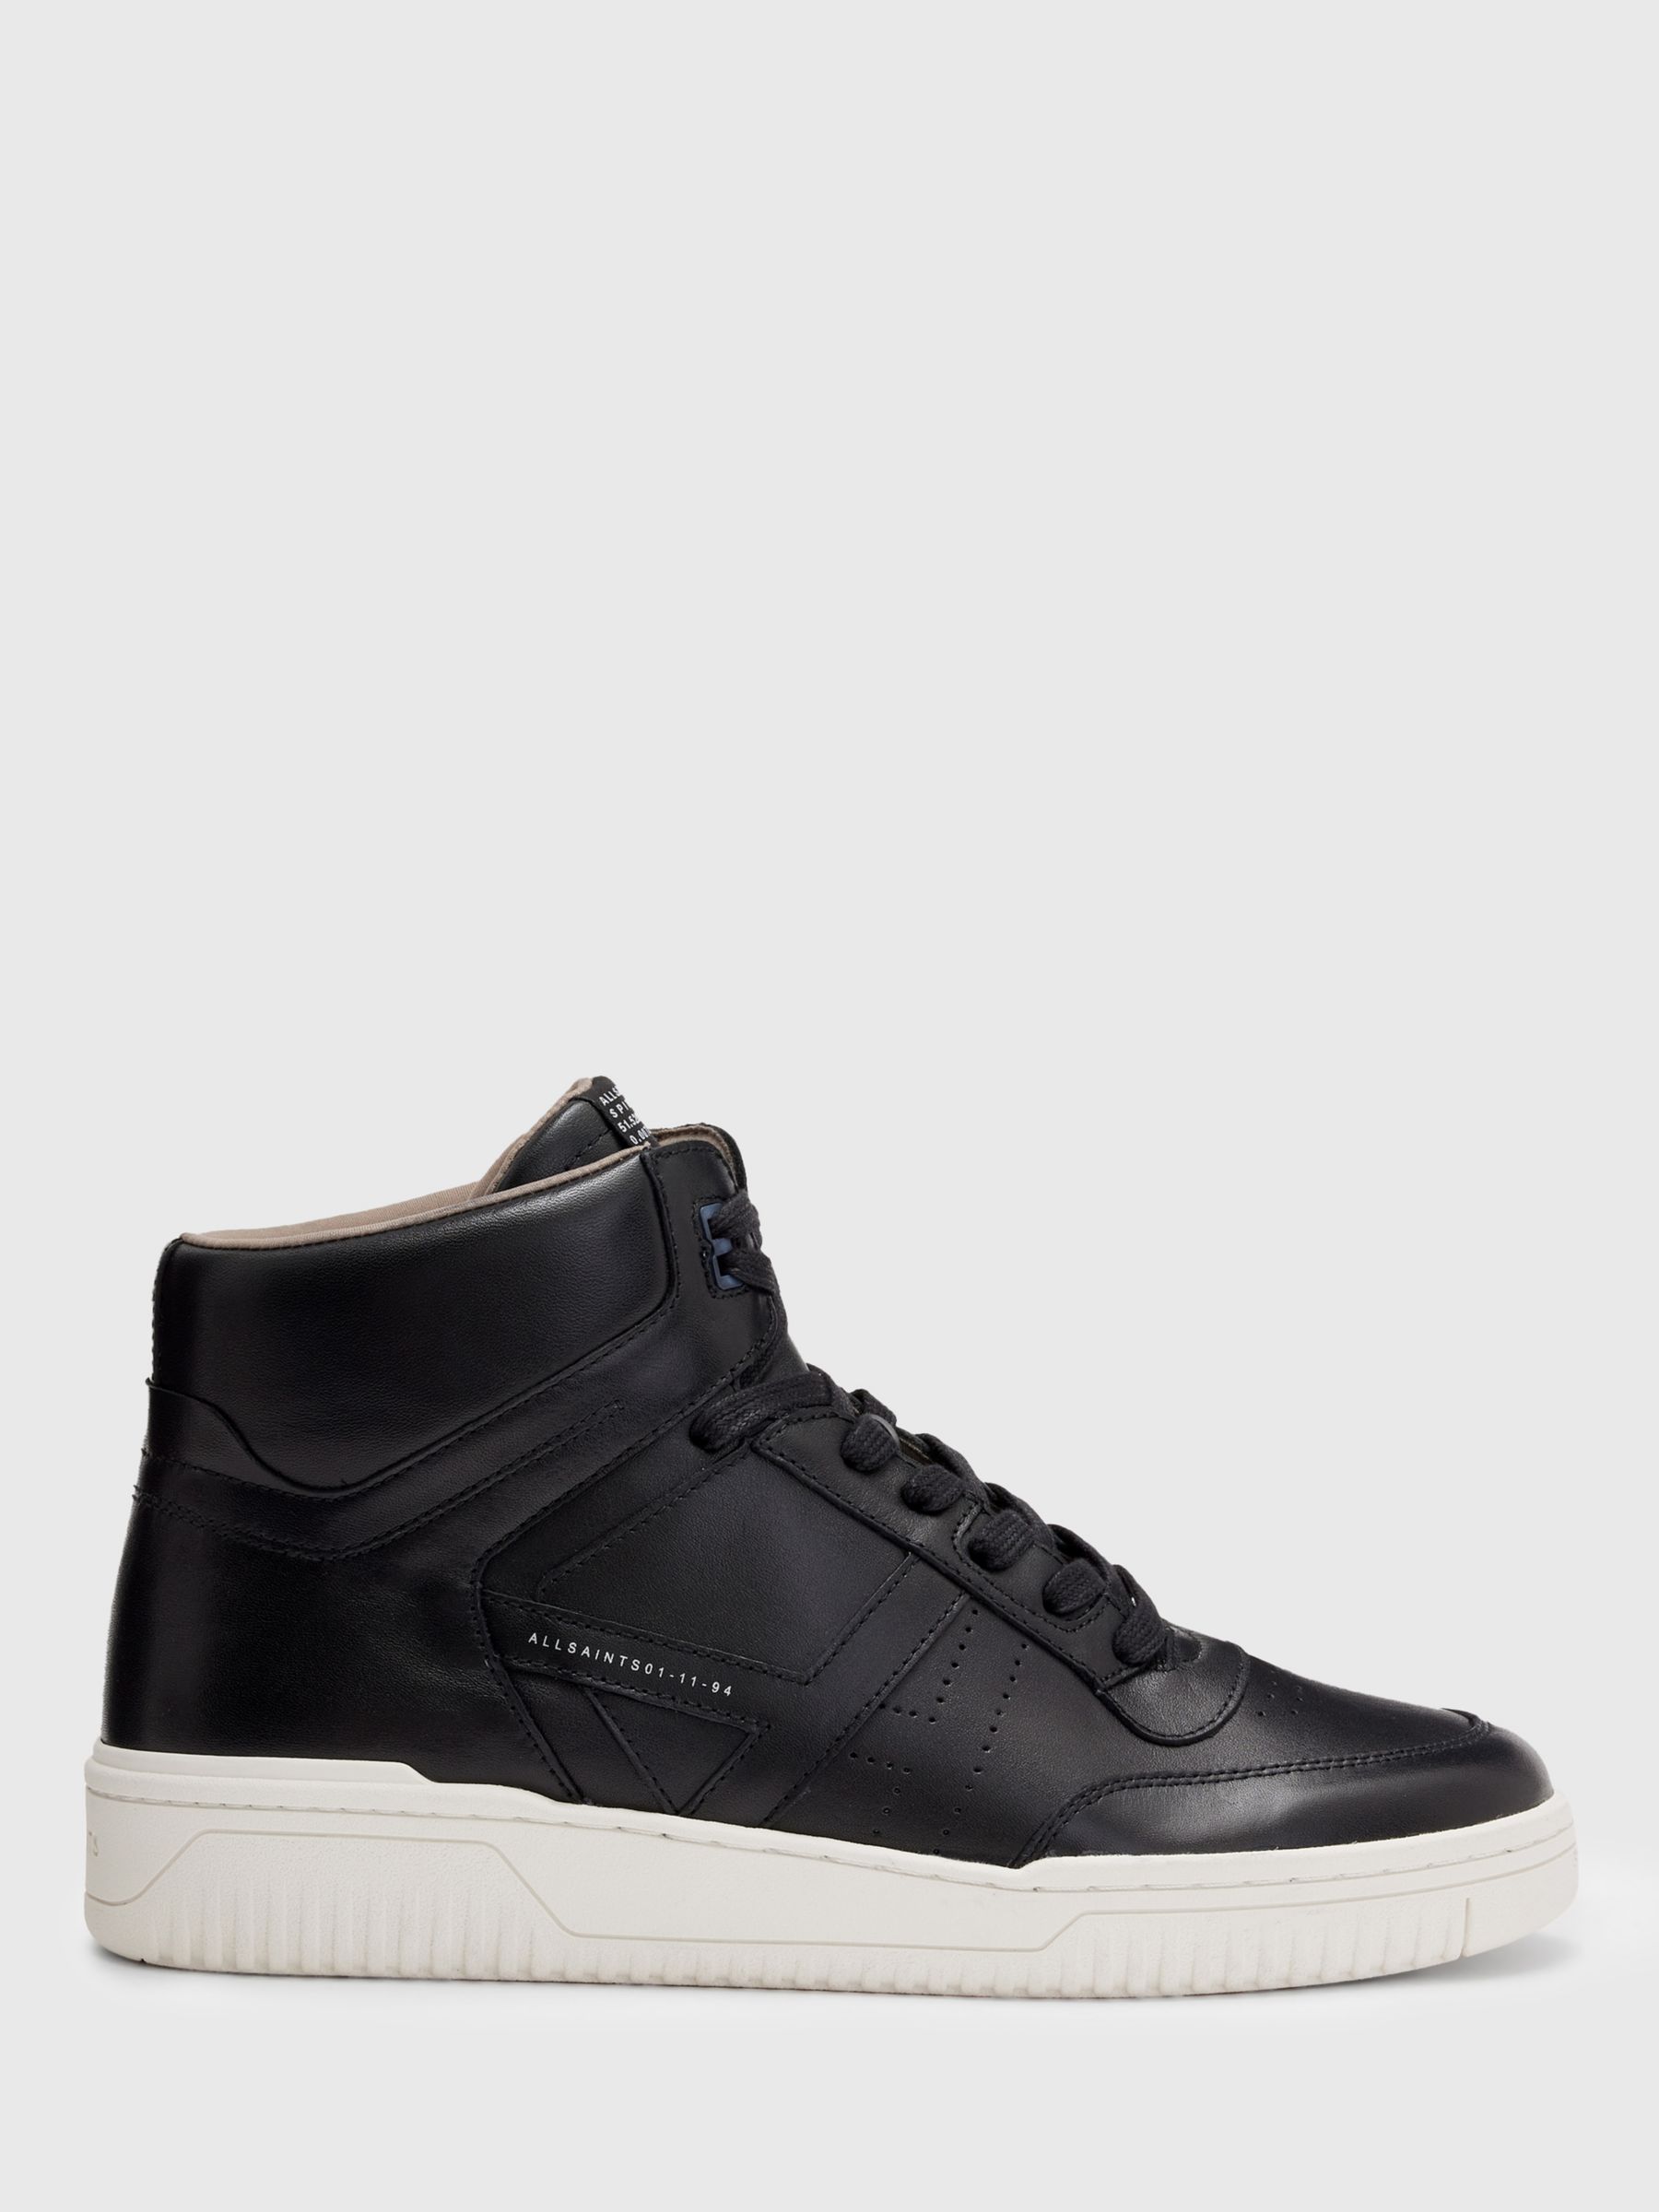 AllSaints Pro High Top Leather Trainers, Black